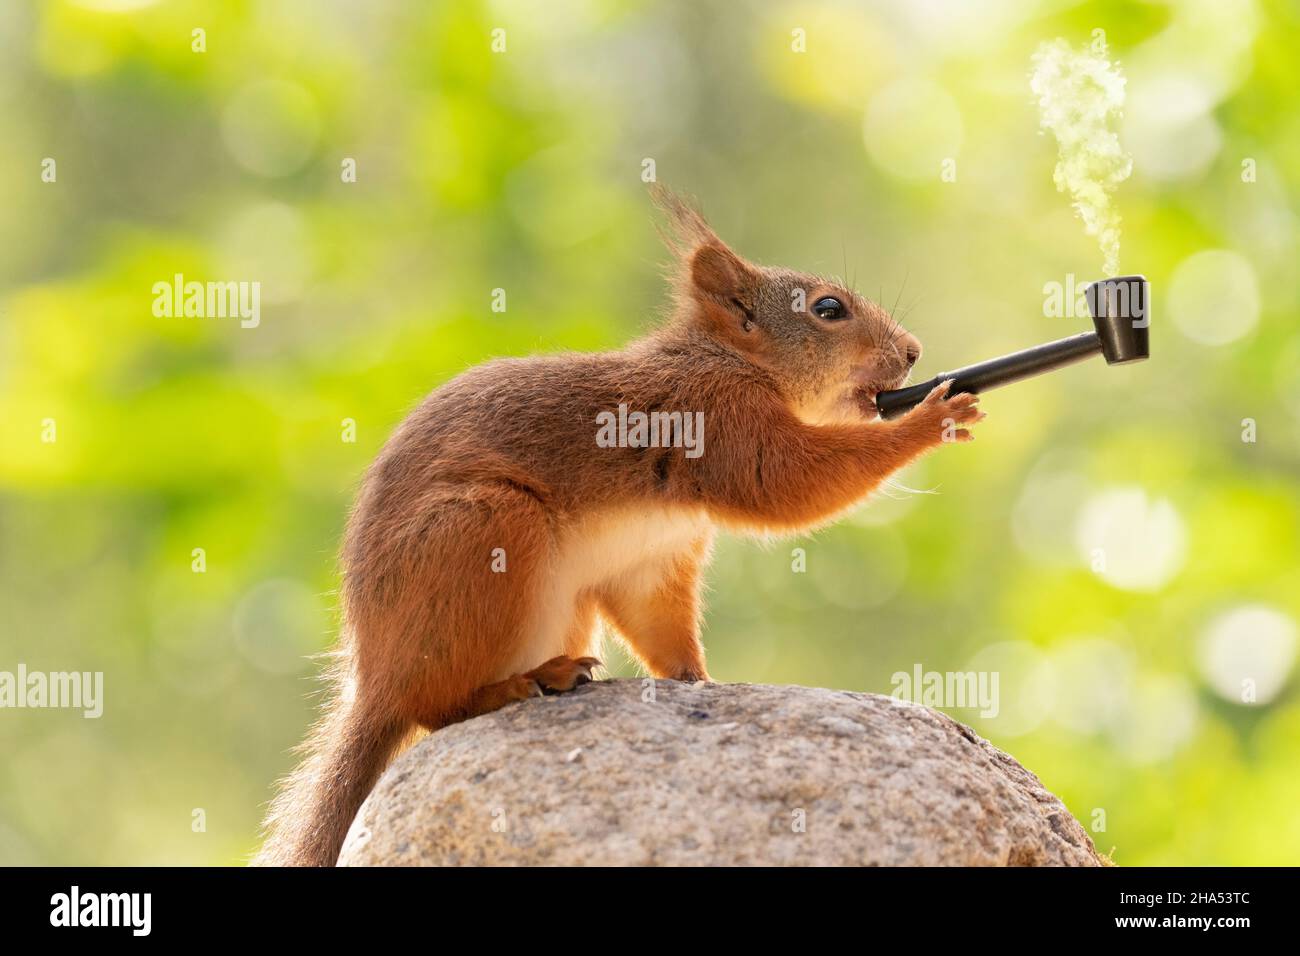 red squirrel is standing on a rock holding a pipe Stock Photo